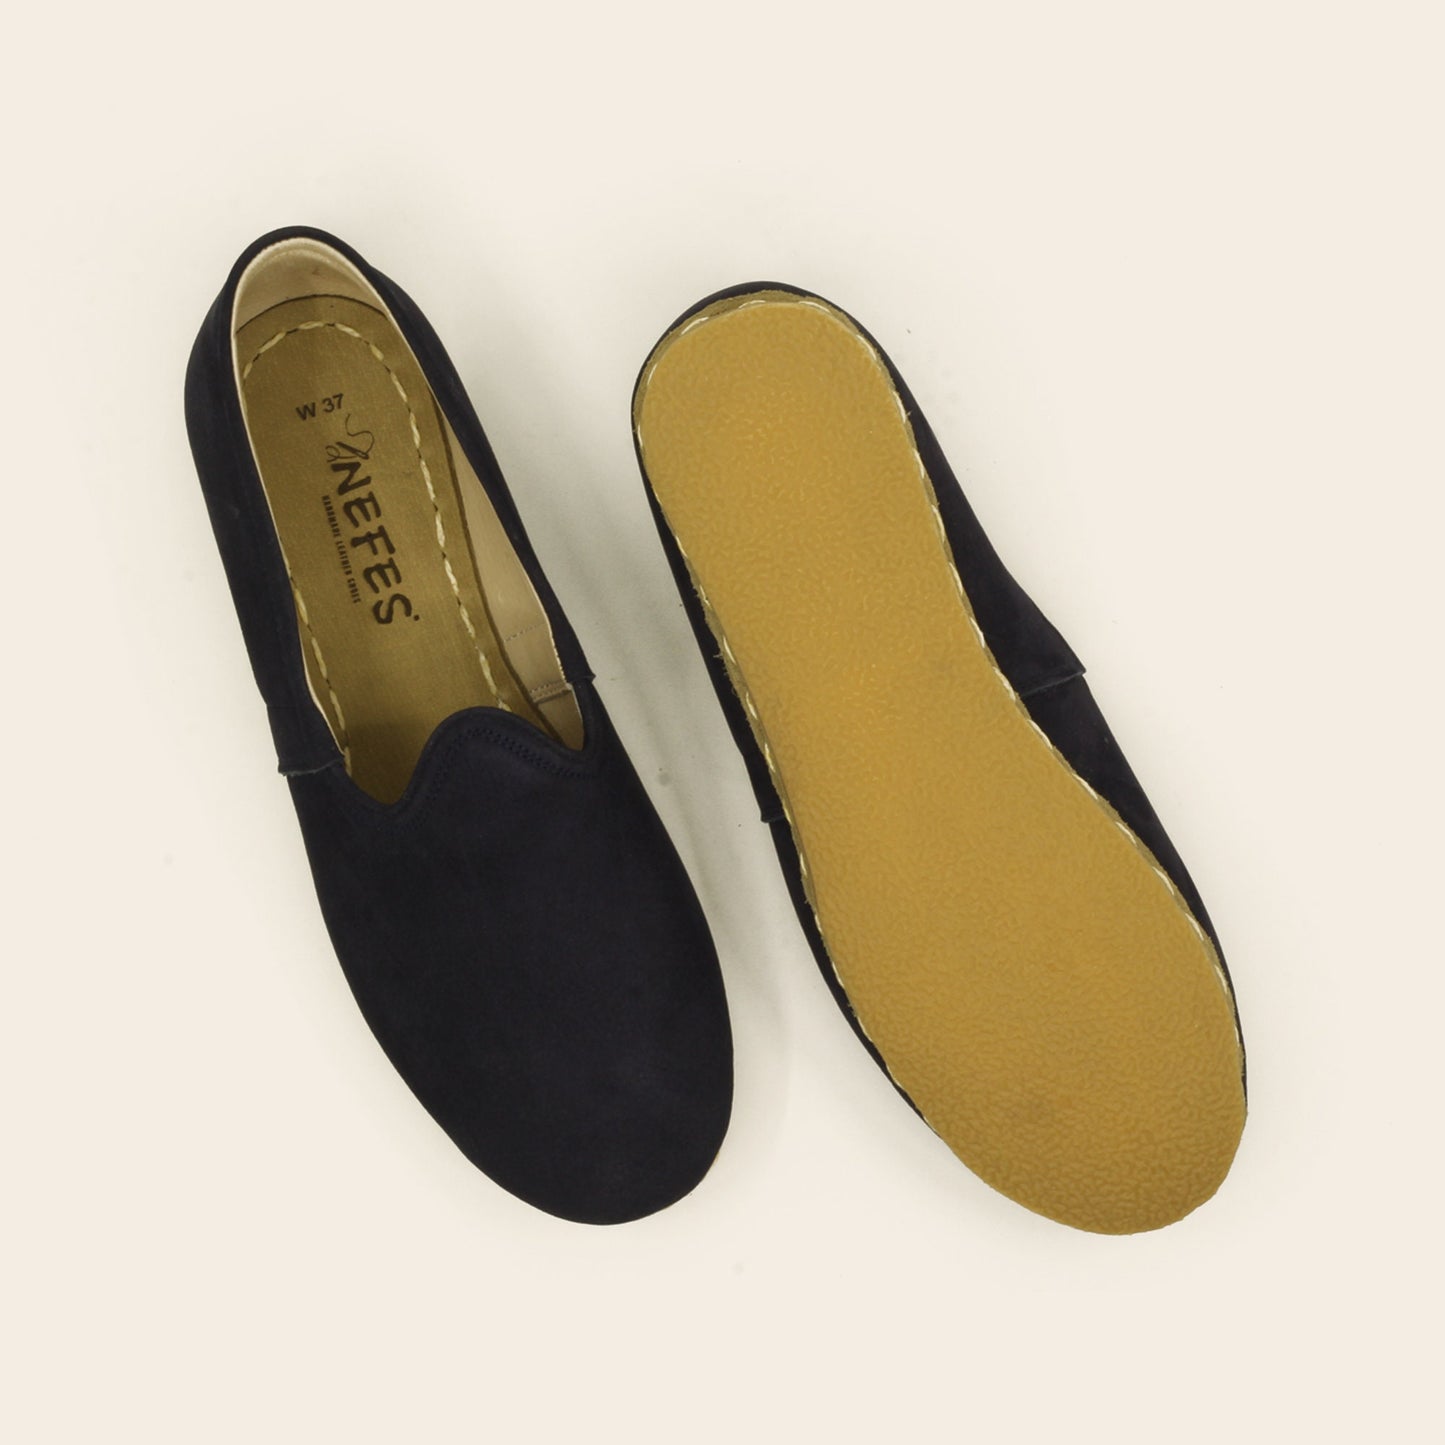 Ladies Navy Blue Leather Handmade Shoes - Nefes Shoes